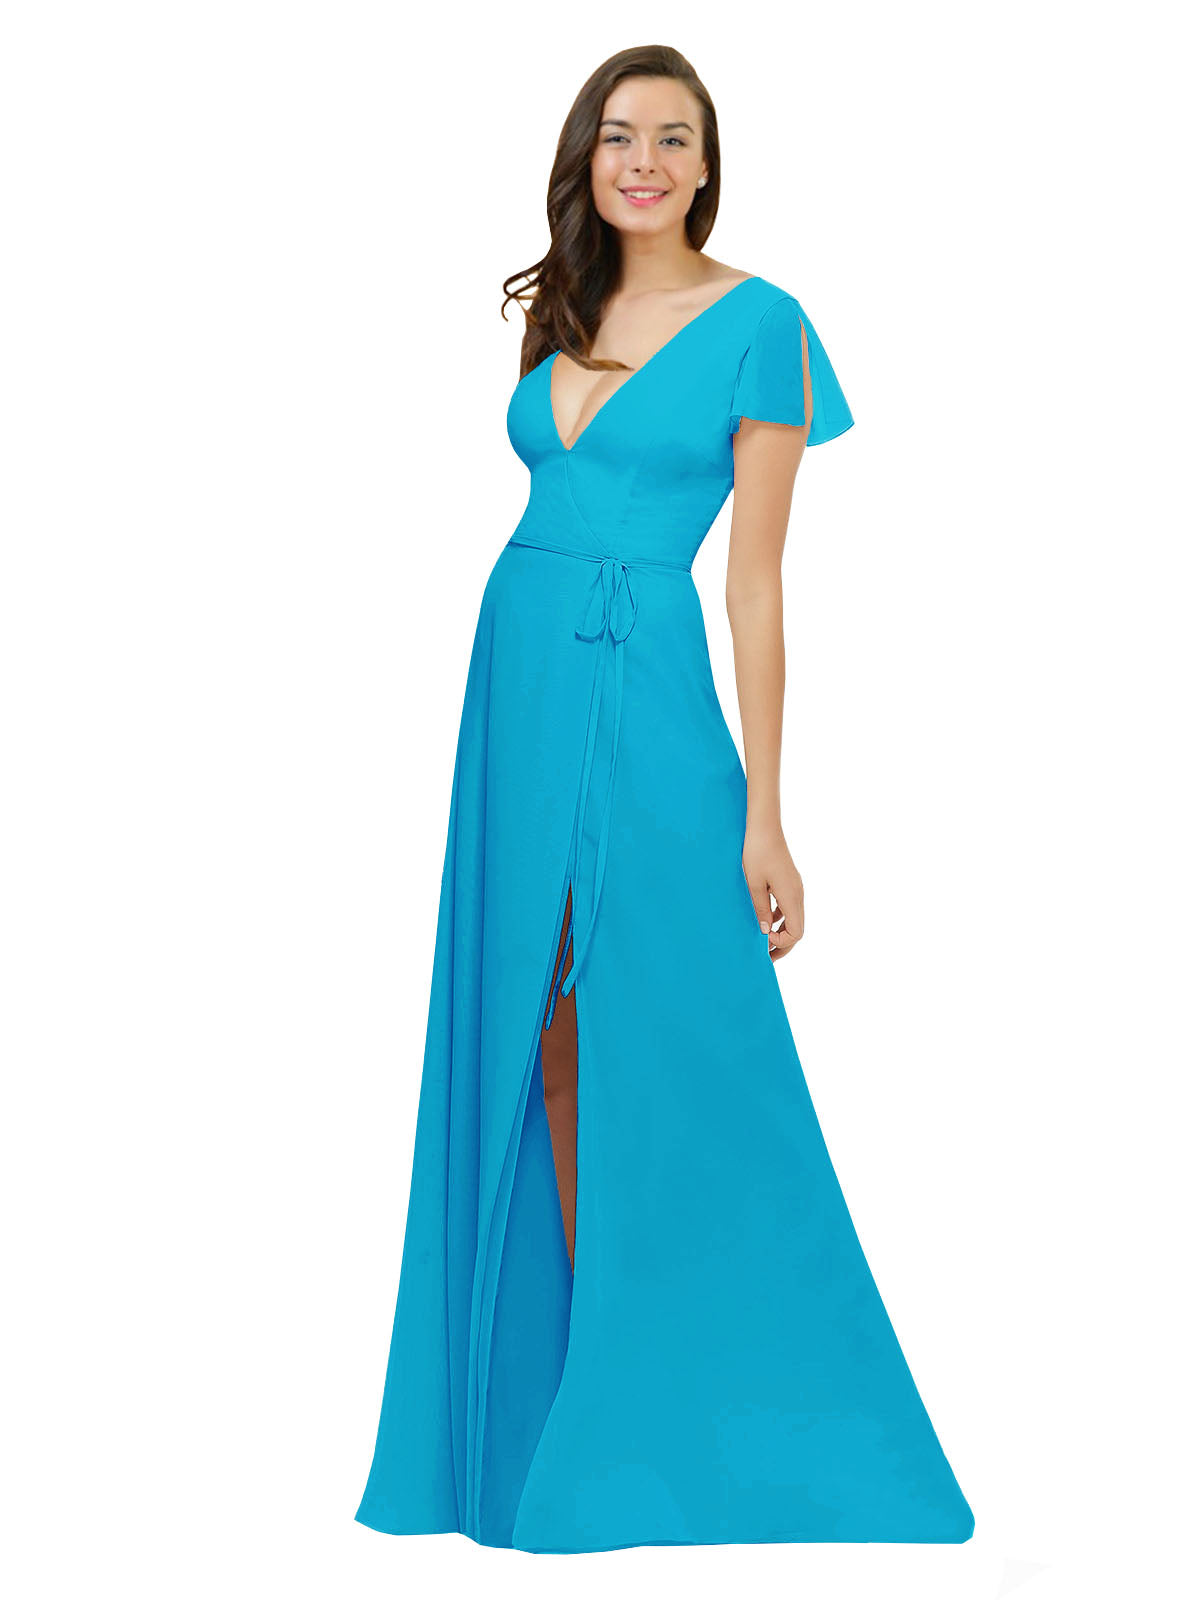 Turquoise A-Line V-Neck Cap Sleeves Long Bridesmaid Dress Dayna